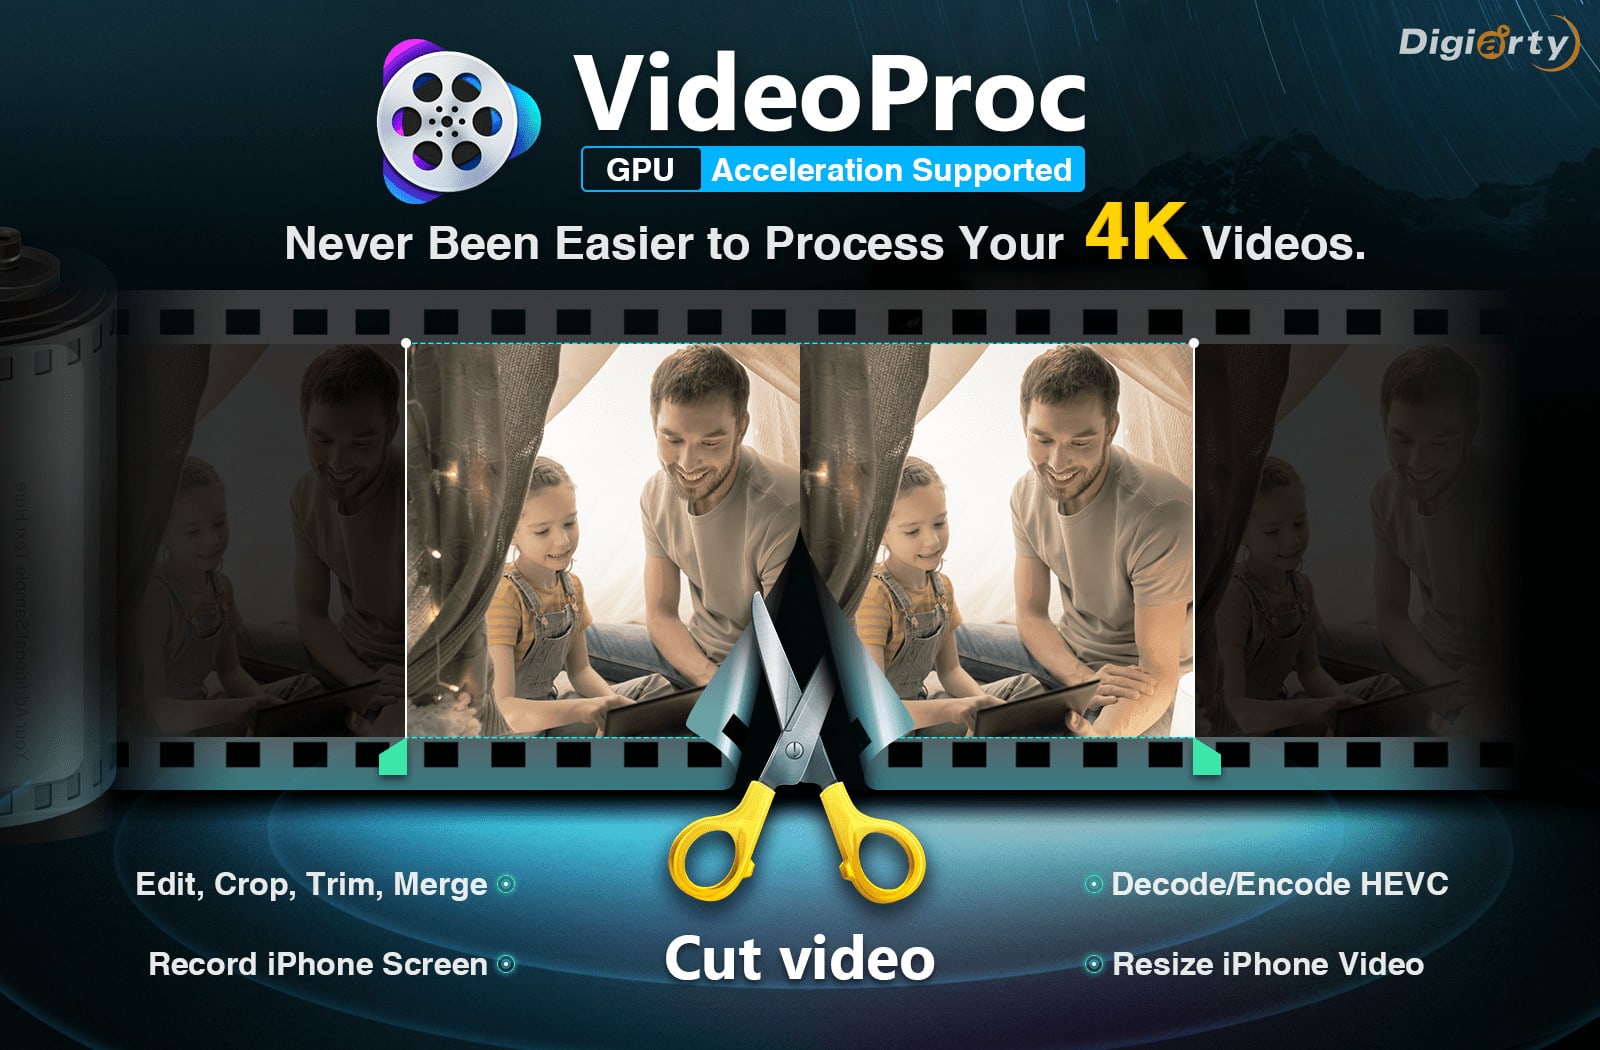 Easy-to-use Mac app VideoProc makes video processing simple.